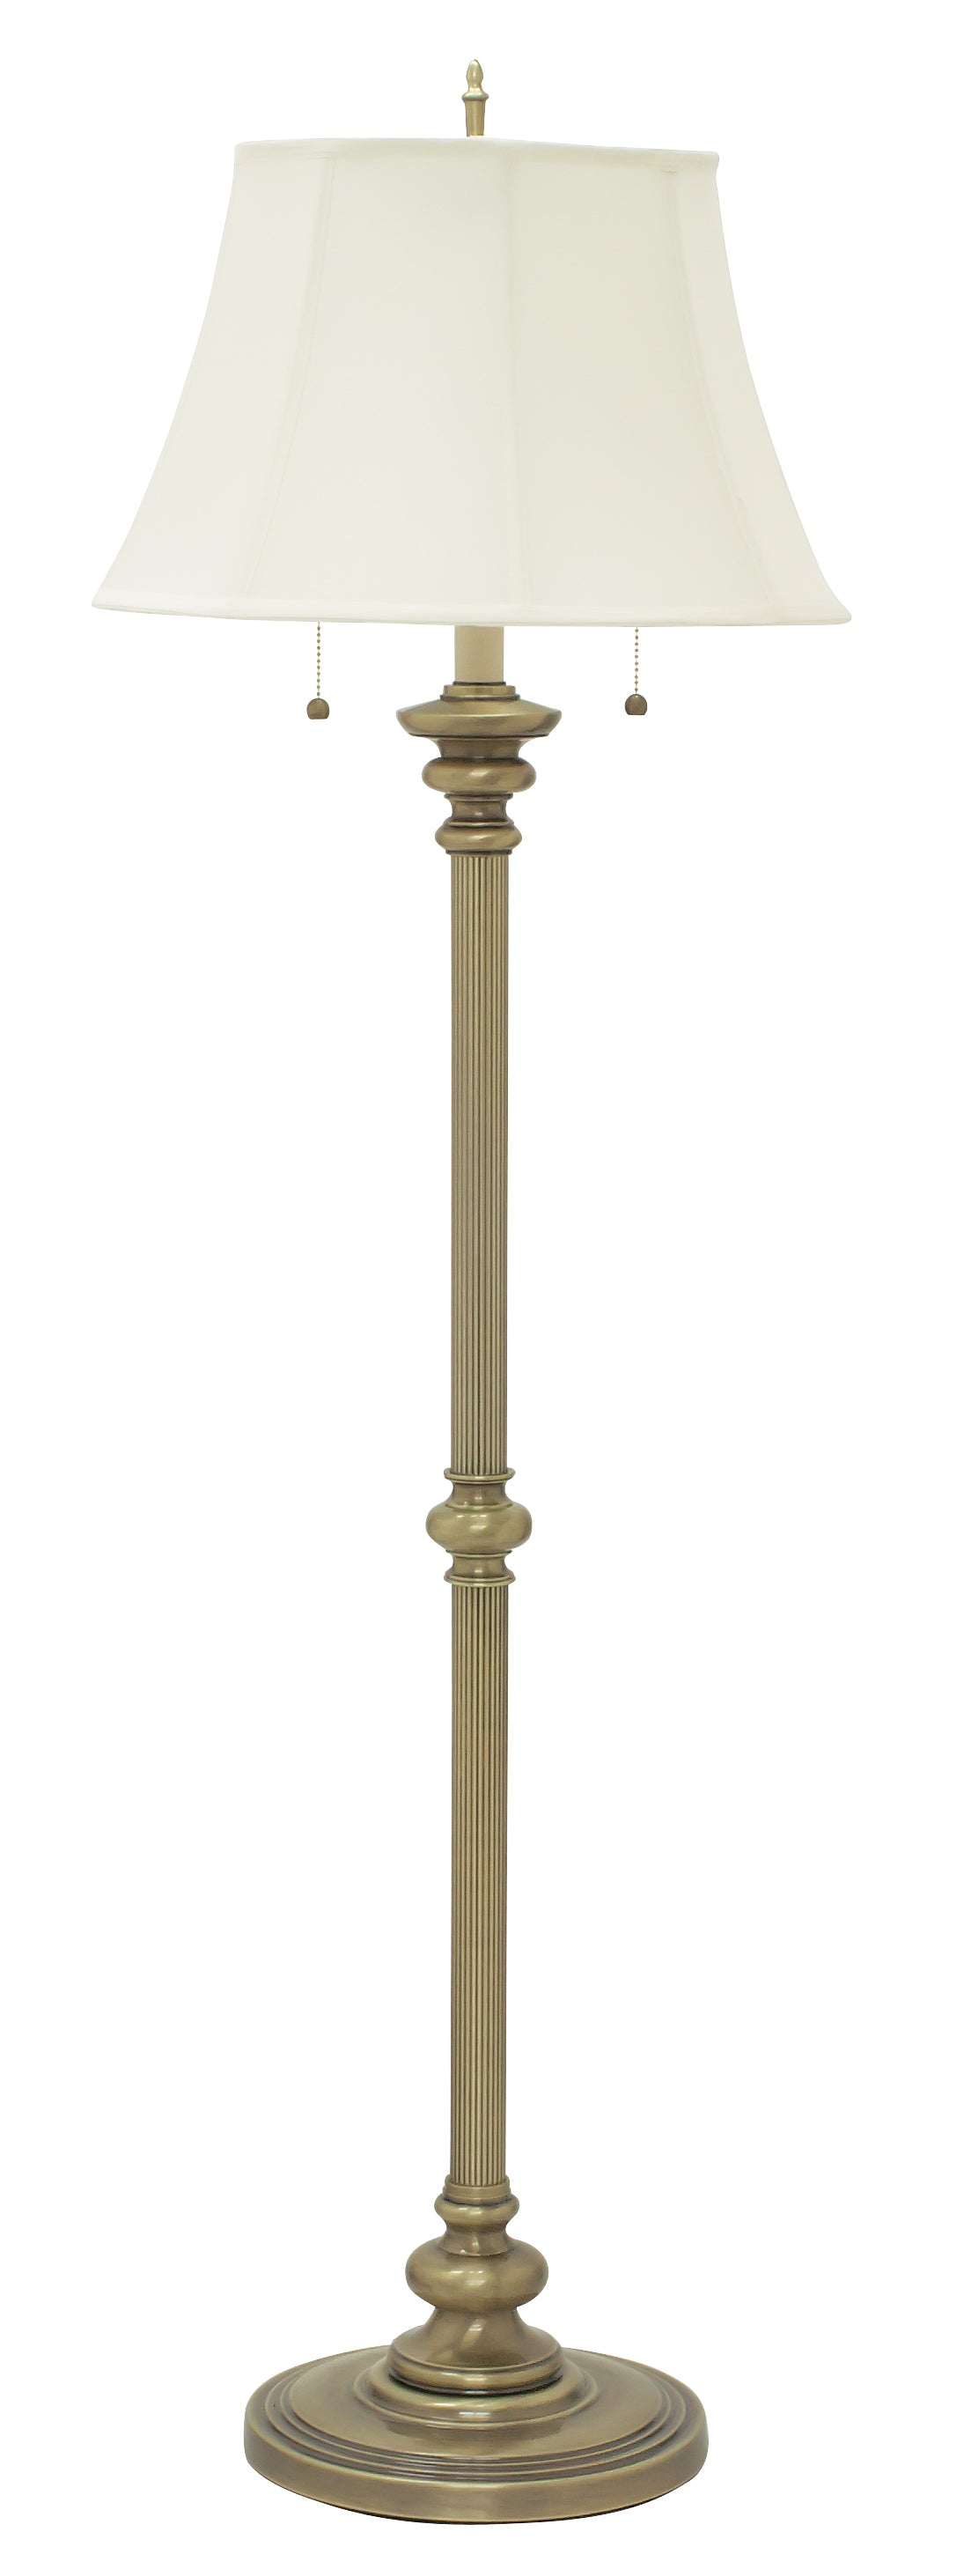 House of Troy Newport 57.5" Antique Brass Floor Lamp N601-AB